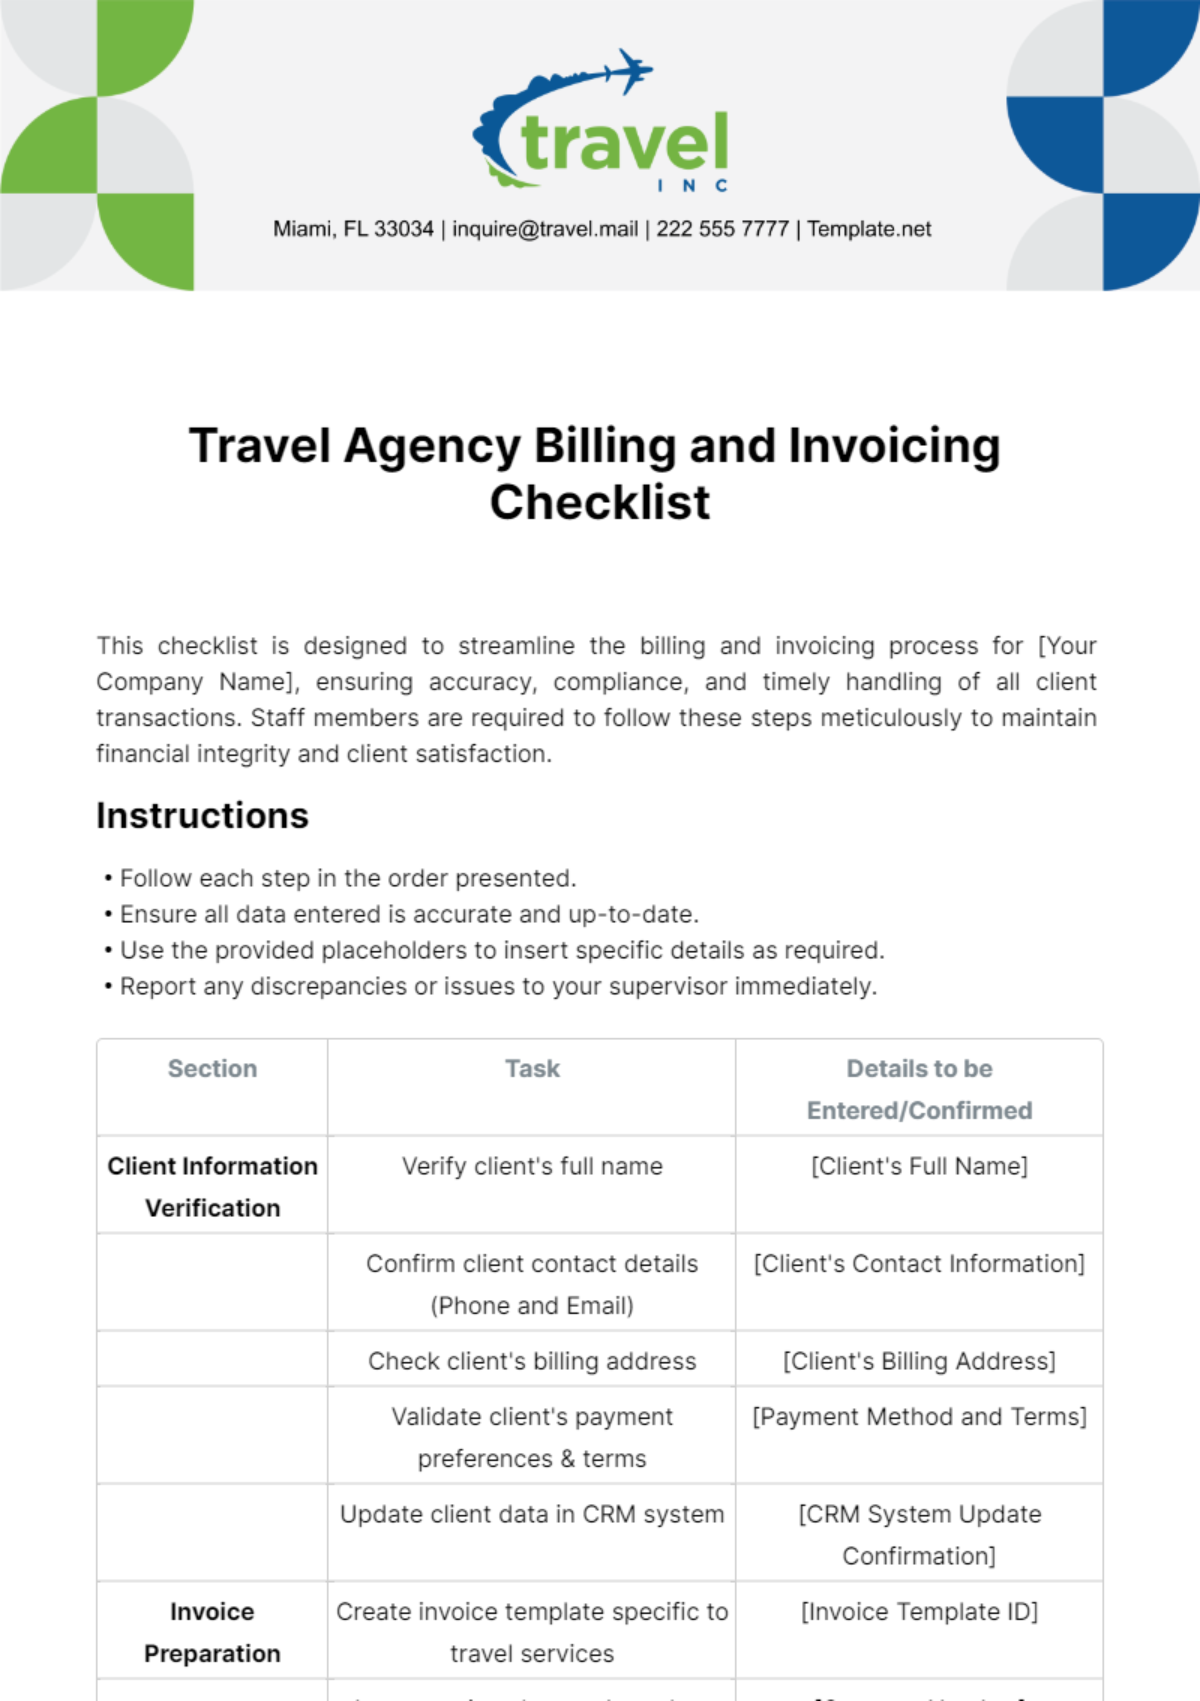 Travel Agency Billing and Invoicing Checklist Template